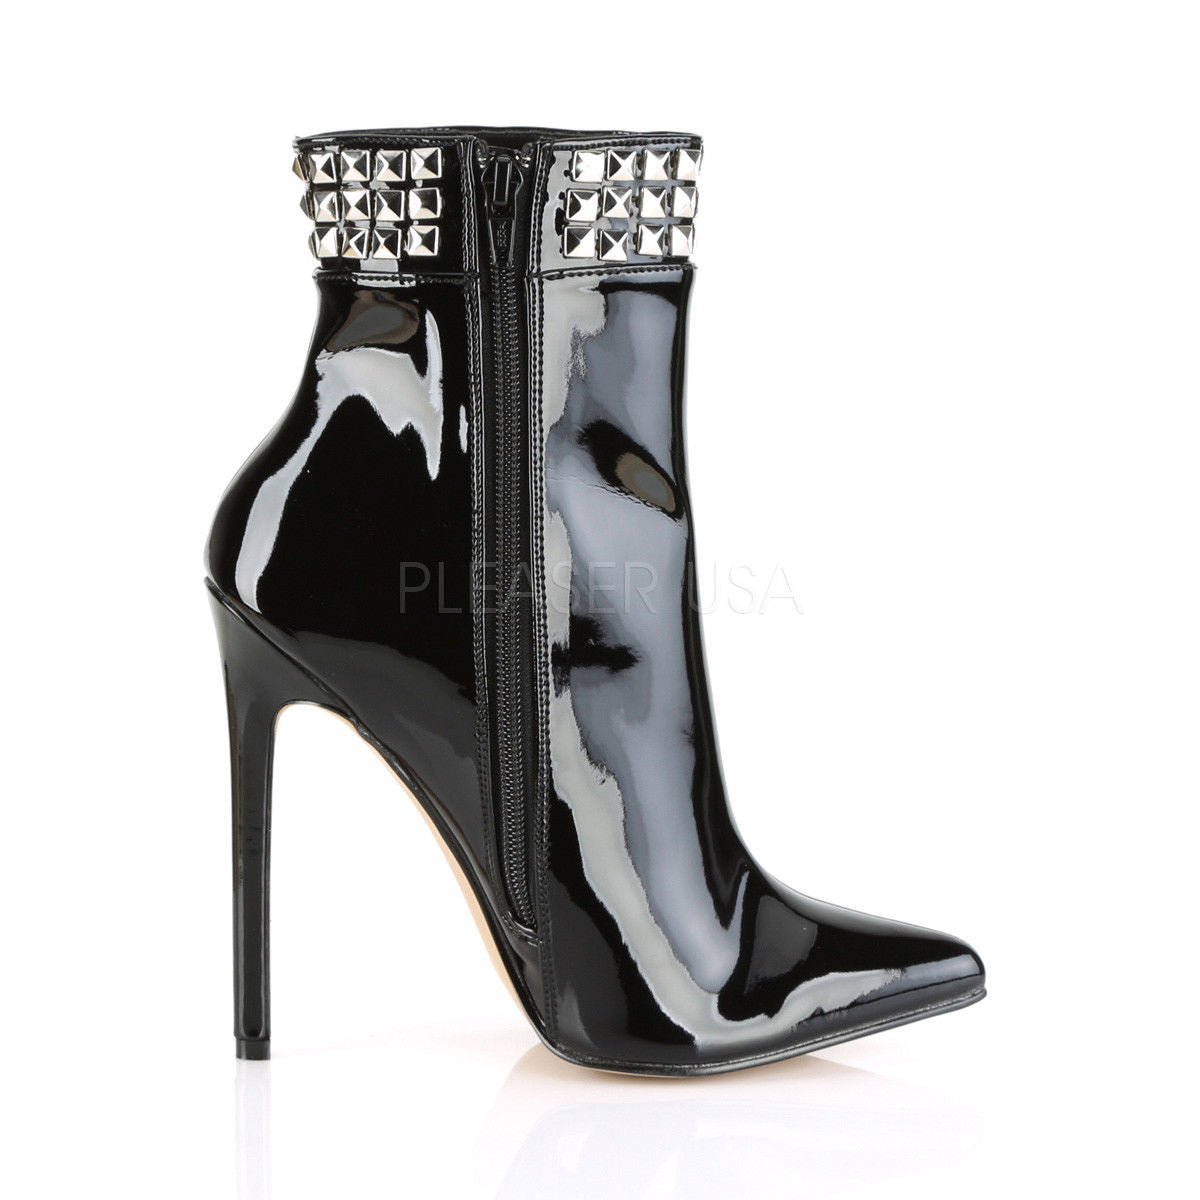 PLEASER Sexy-1006 Black Patent Sexy Club Studded Ankle Boots Stiletto High Heels - A Shoe Addiction